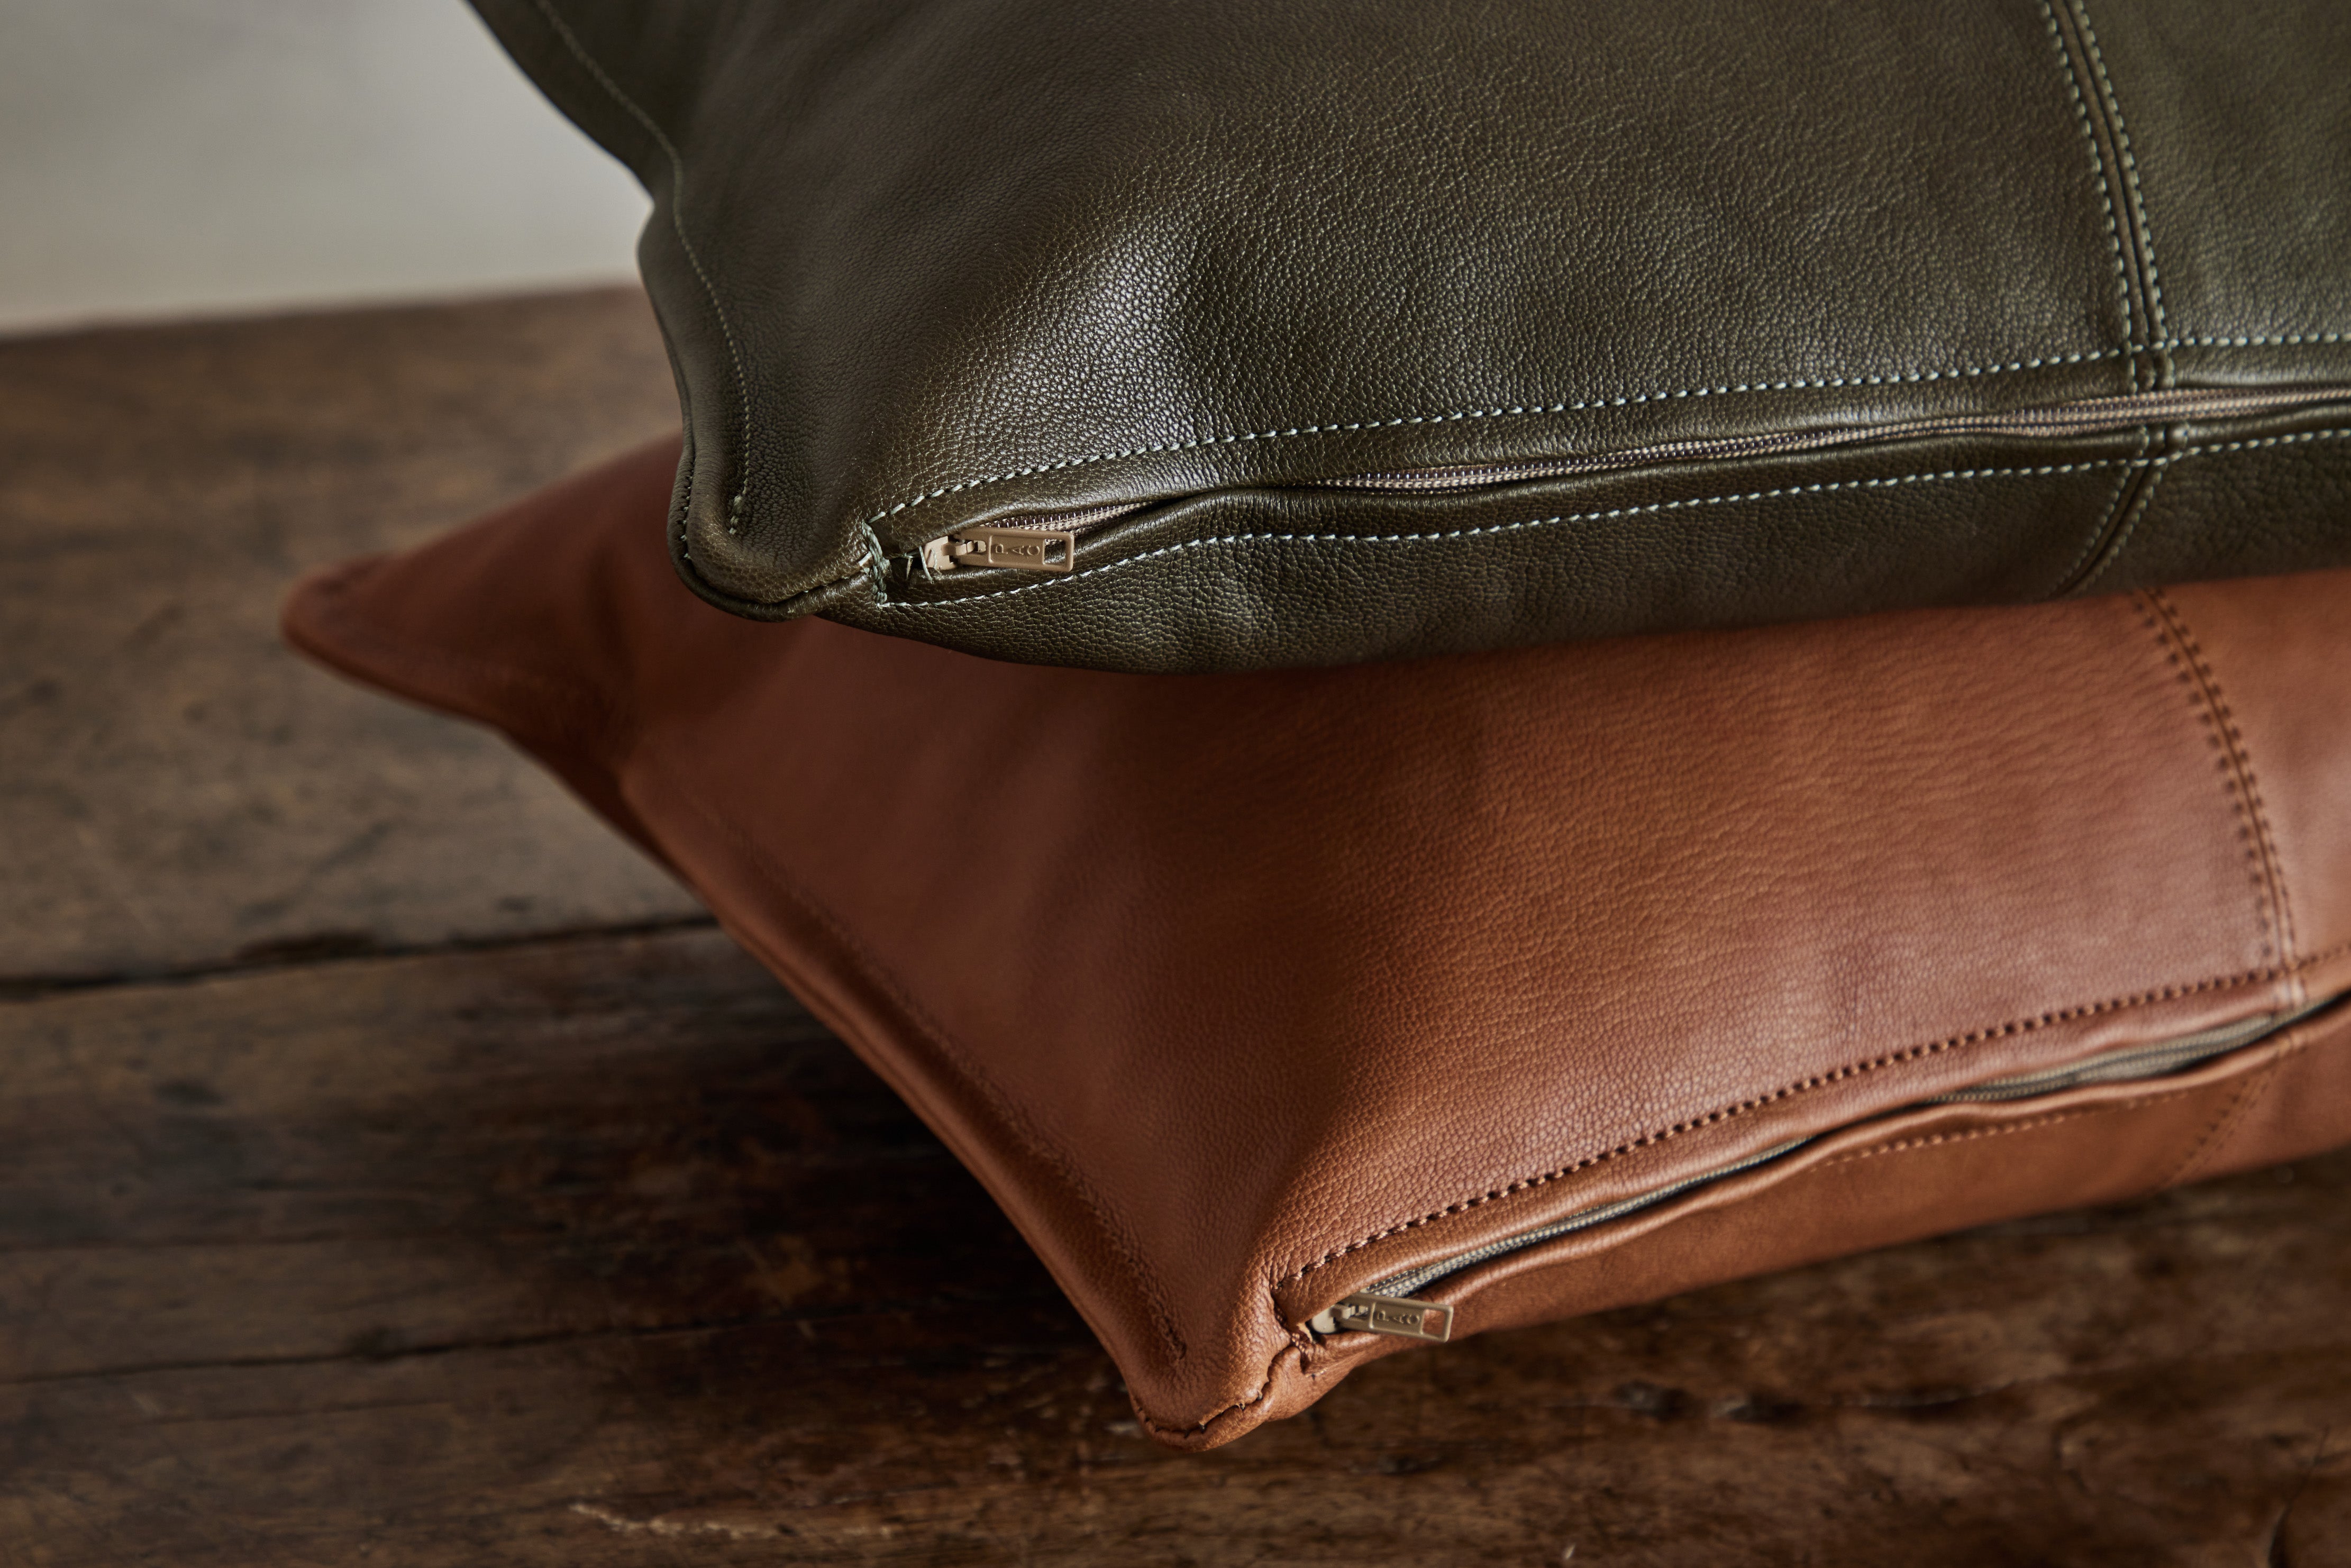 Nickey Kehoe, Olive Leather Pillow